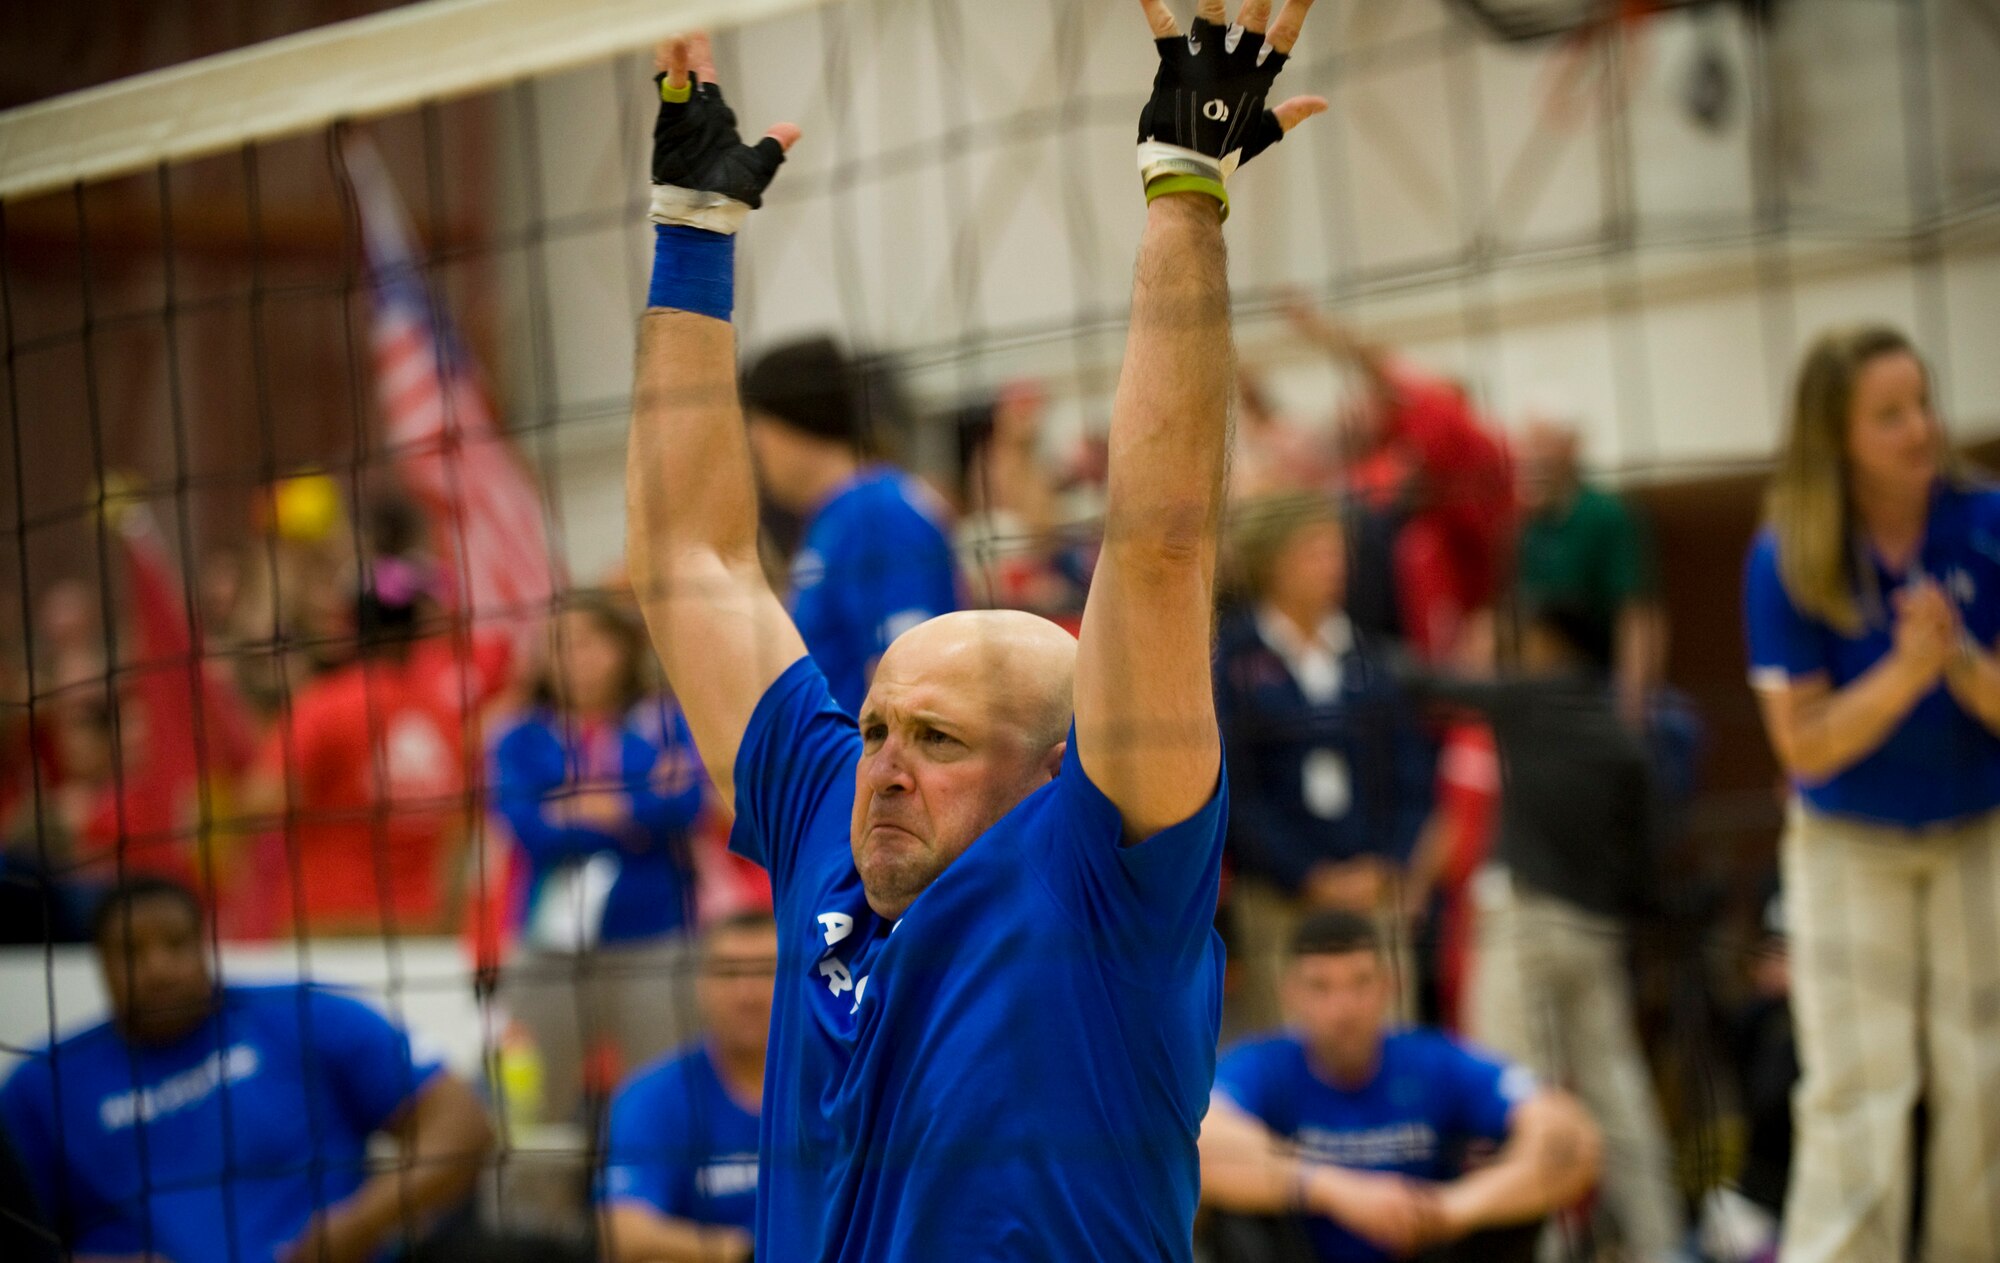 Chief Master Sgt. Damian Orslene hypes up the crowd during a close match against the Army May 19, 2011, during the the second annual Warrior Games in Colorado Springs, Colo. The Army won the series with two straight games. (U.S. Air Force photo/Staff Sgt. Christopher Griffin)